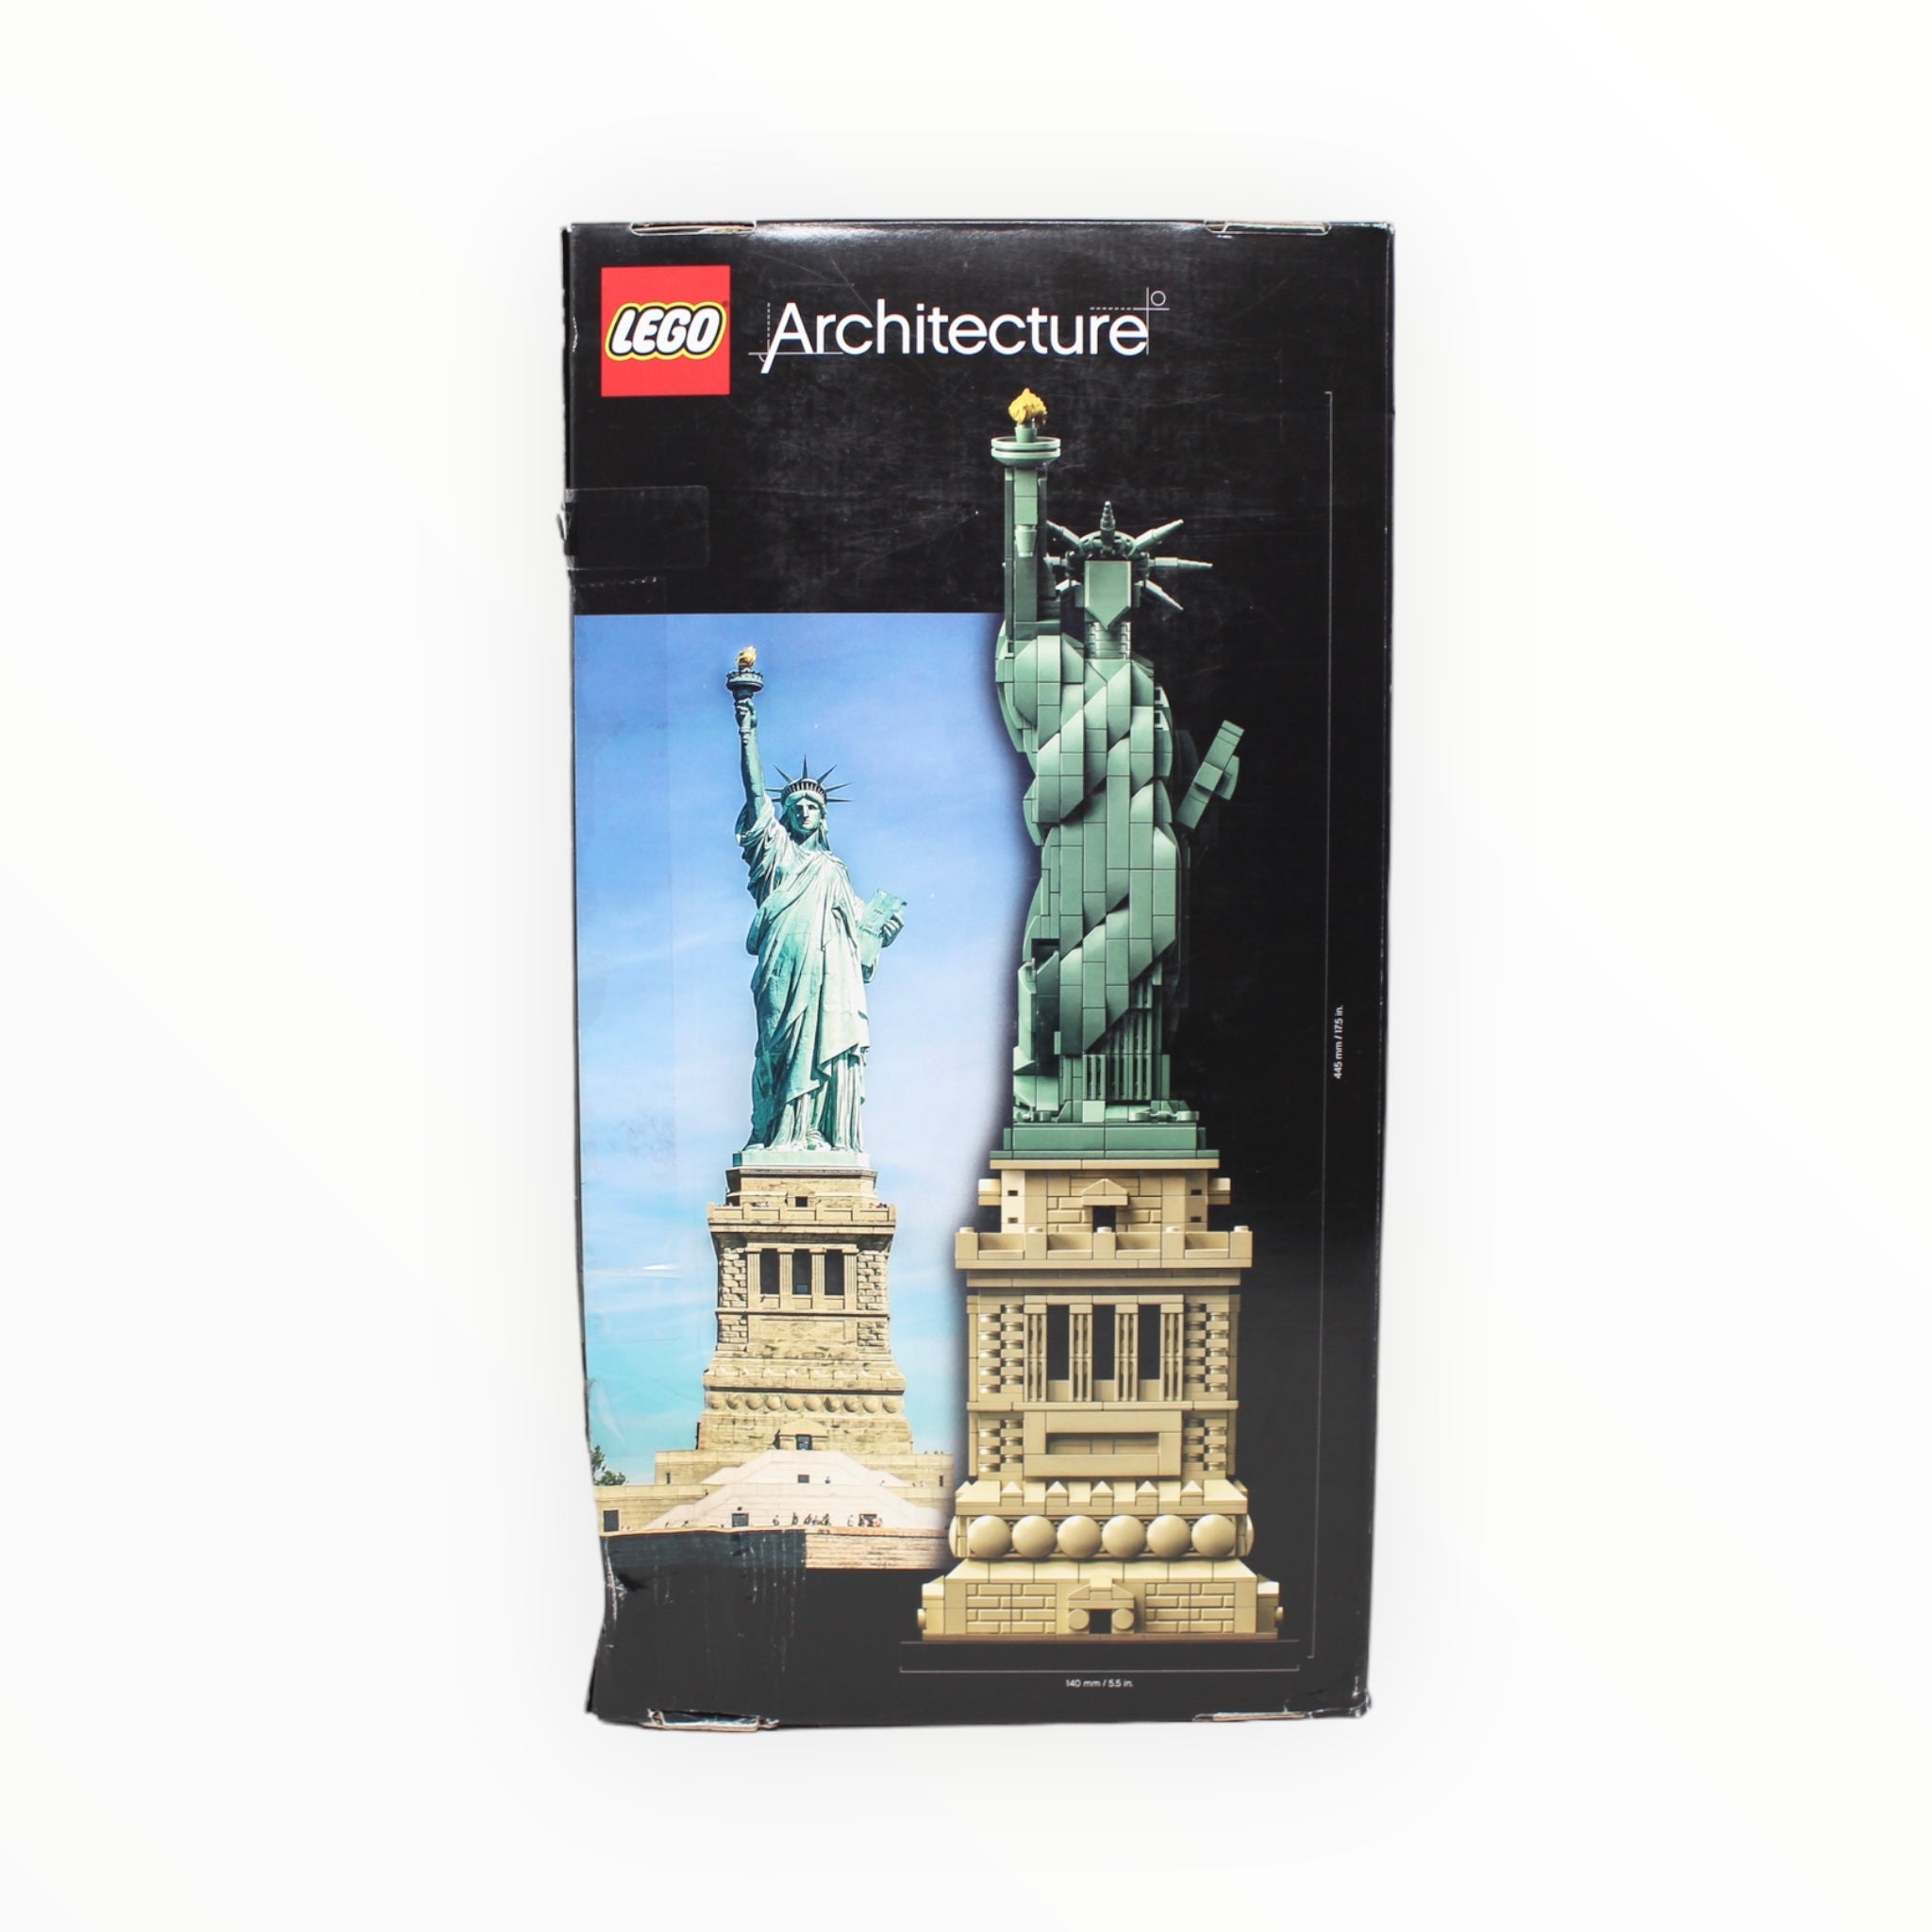 Certified Used Set 21042 Architecture Statue of Liberty